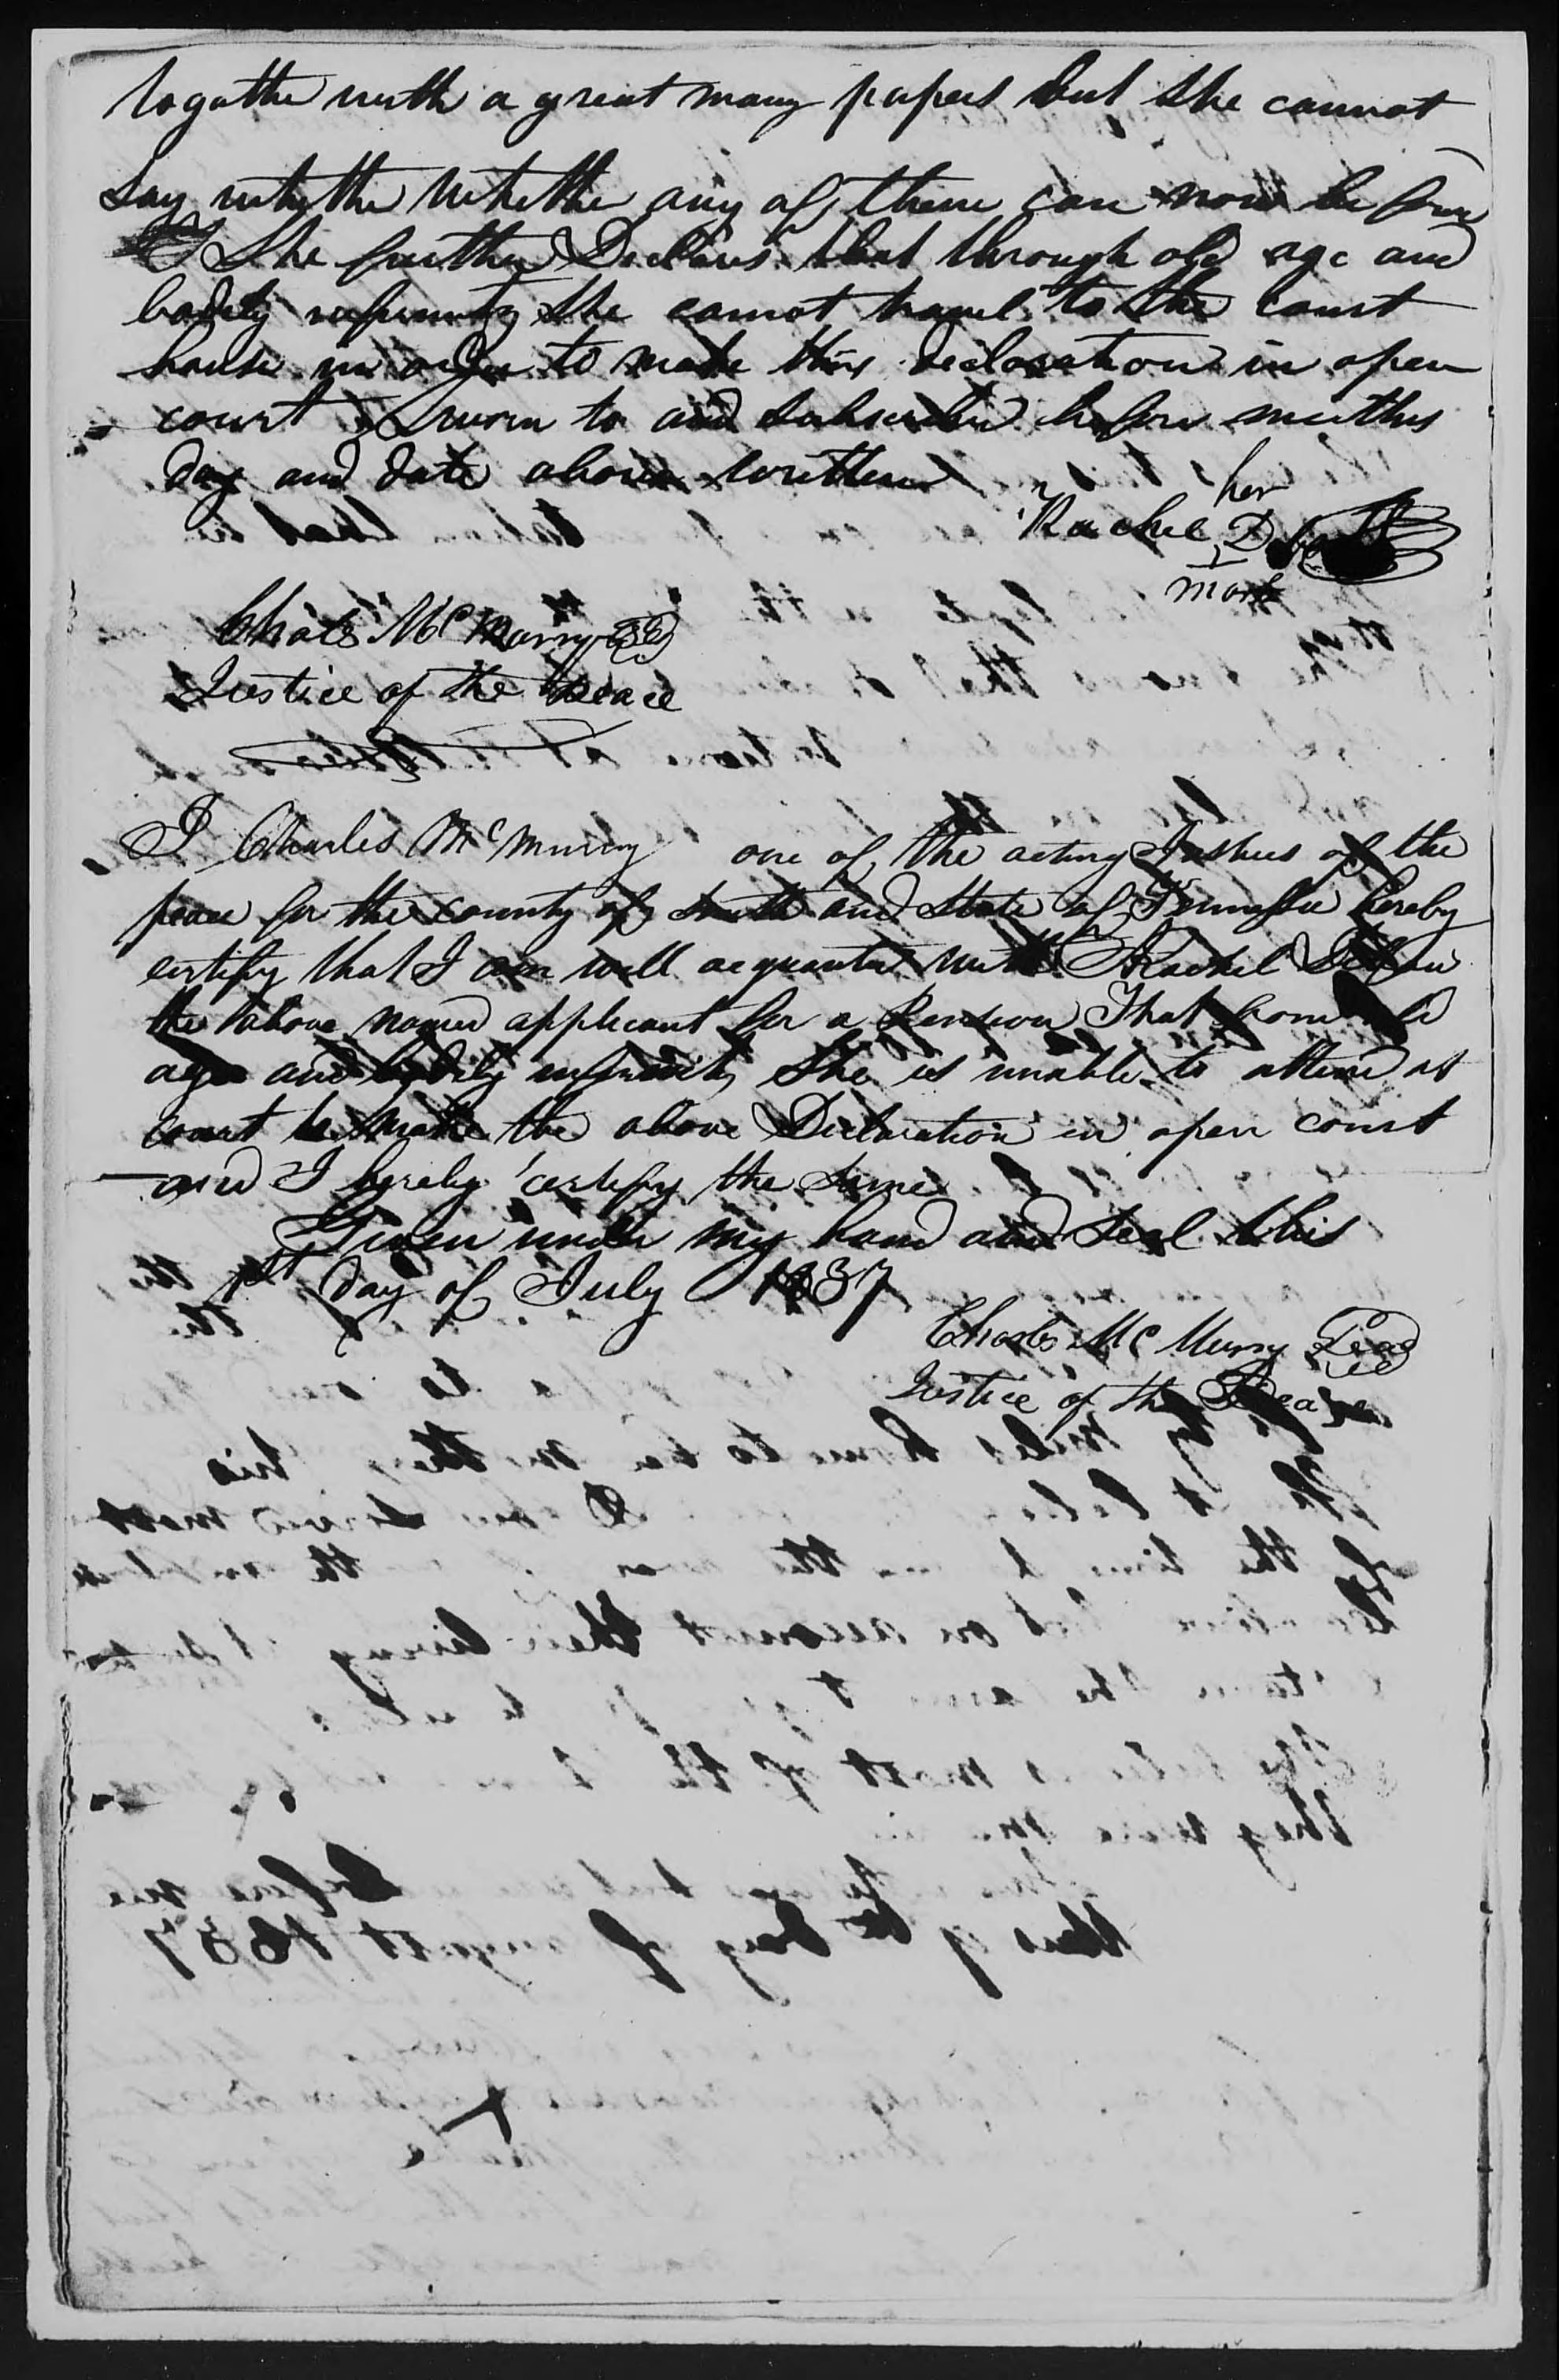 Application for a Widow's Pension from Rachel Debow, 1 July 1837, page 3